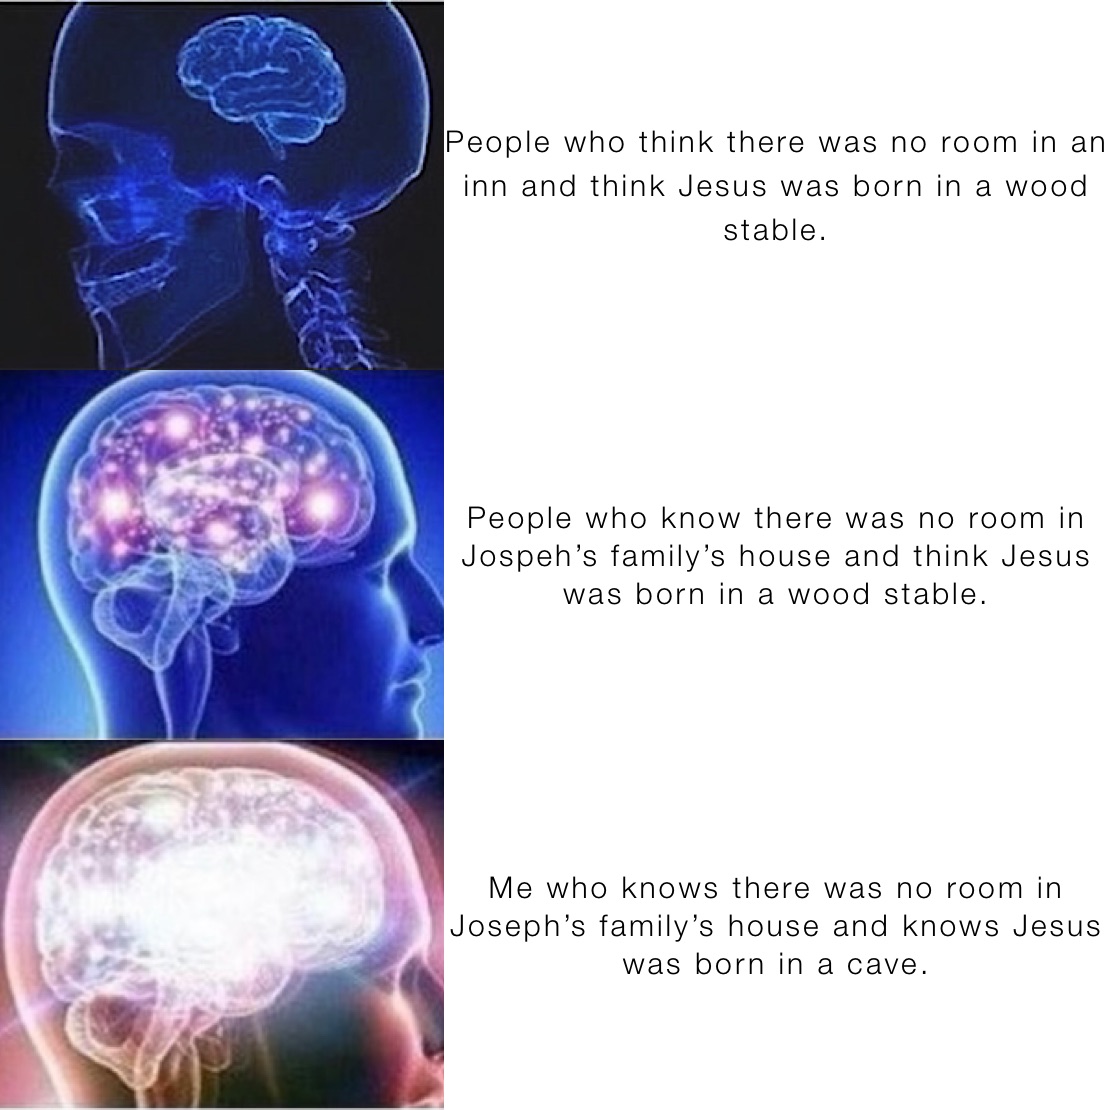 People who think there was no room in an inn and think Jesus was born in a wood stable. People who know there was no room in Jospeh’s family’s house and think Jesus was born in a wood stable. Me who knows there was no room in Joseph’s family’s house and knows Jesus was born in a cave.